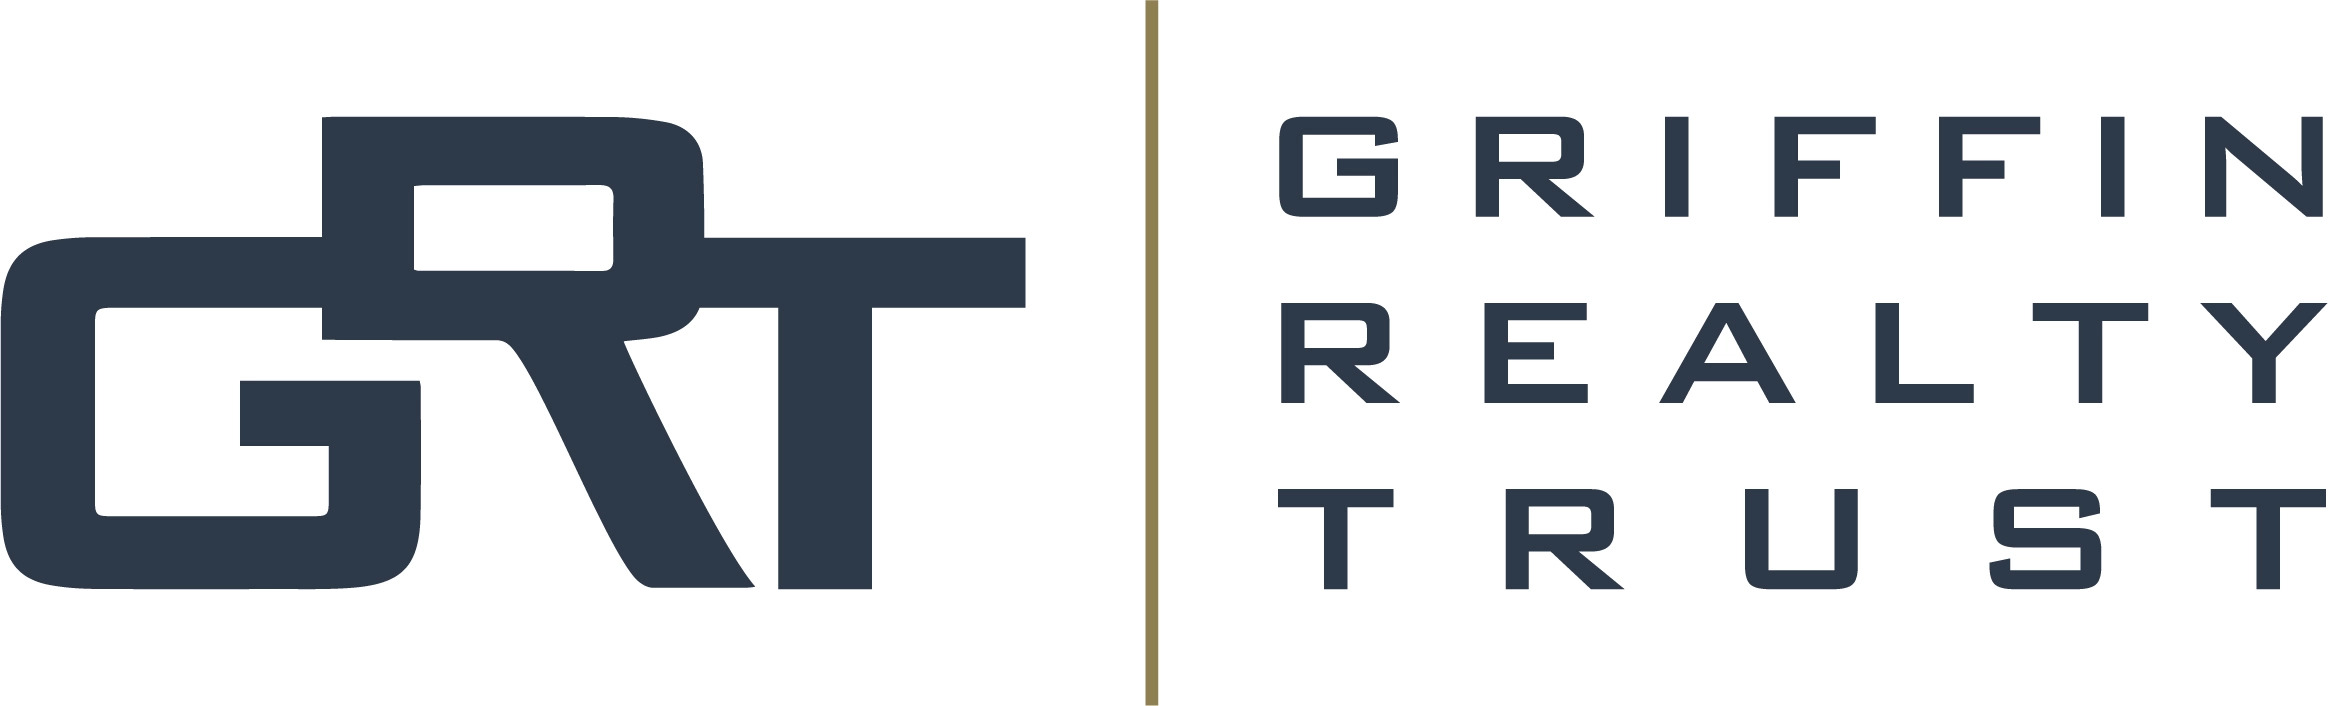 GRIFFIN REALTY TRUST